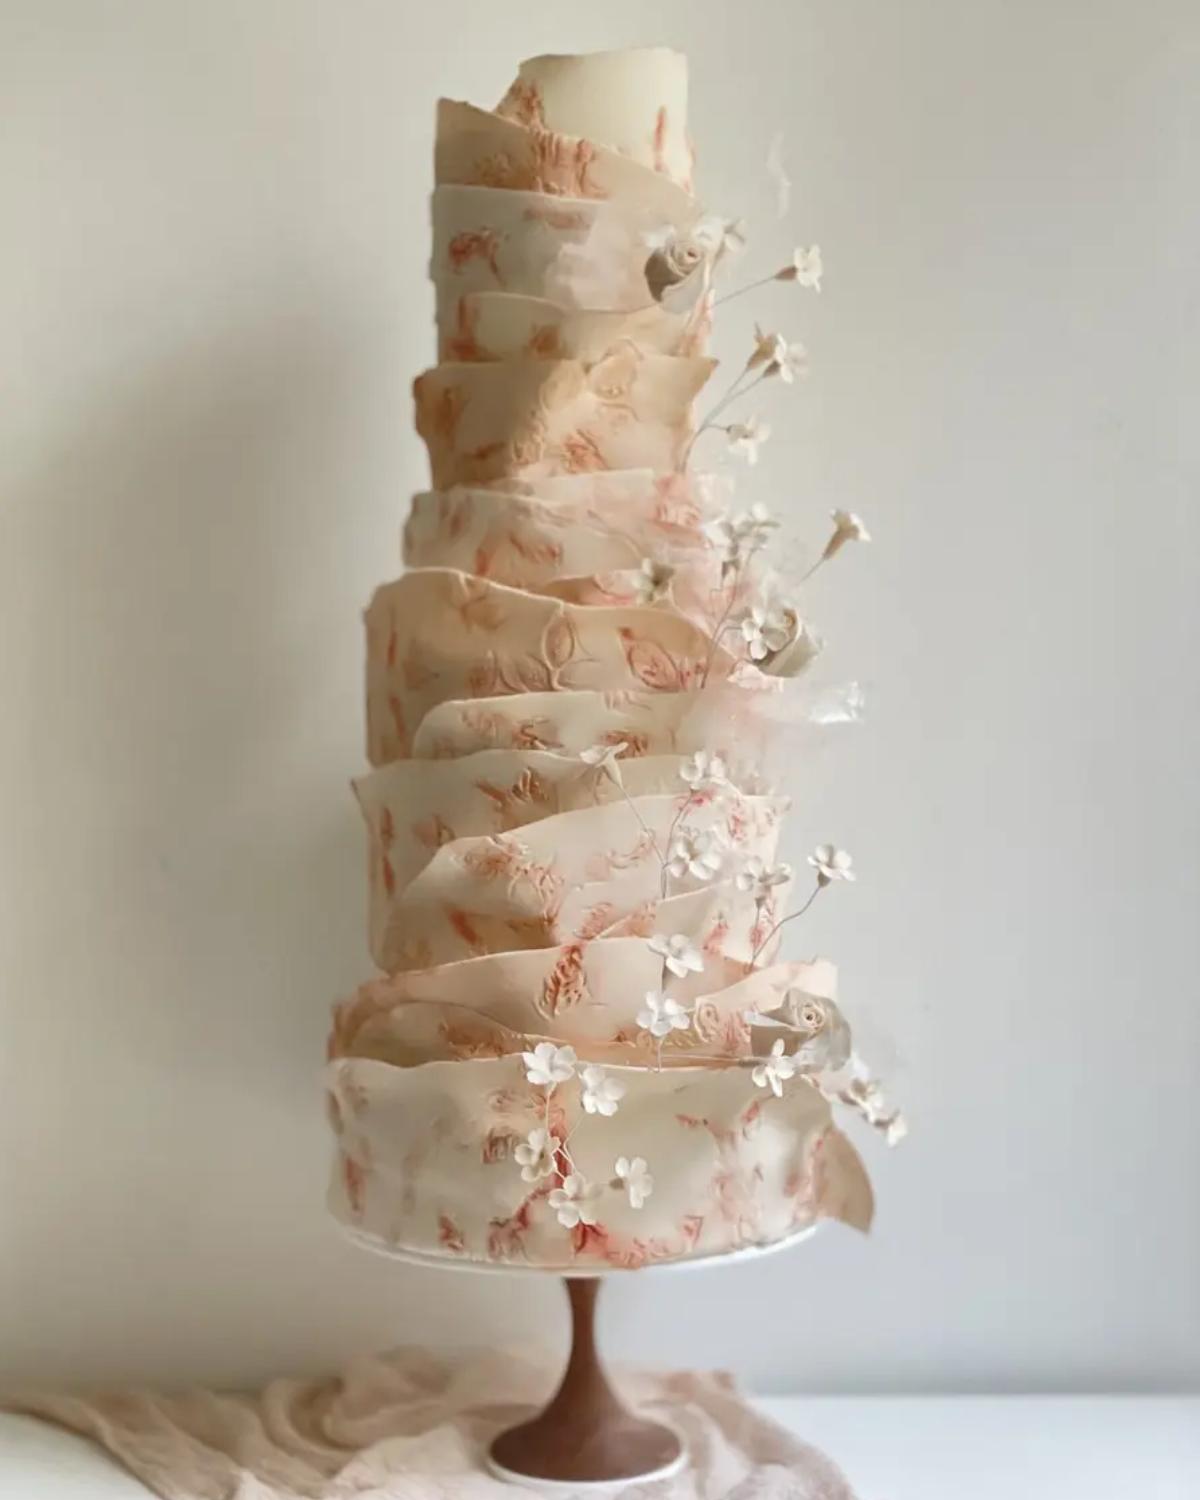 6 Famous Professional Cake Artists Sculpting Cakes Into a Piece of Art